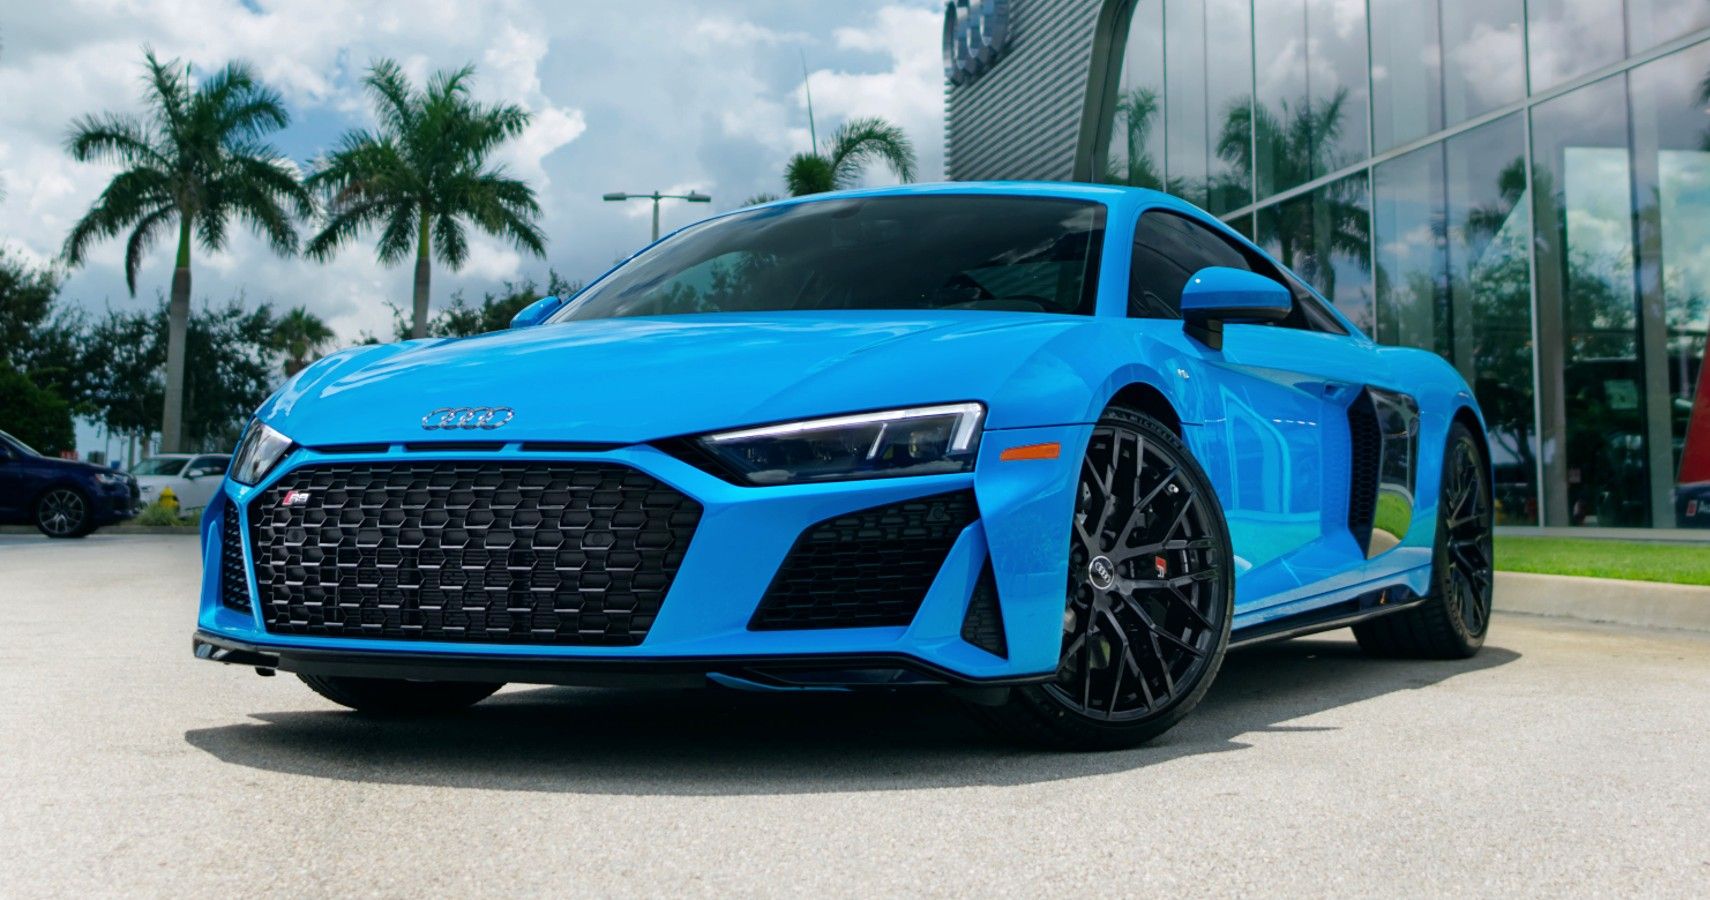 10 Reasons To Buy An Audi R8 While You Still Can